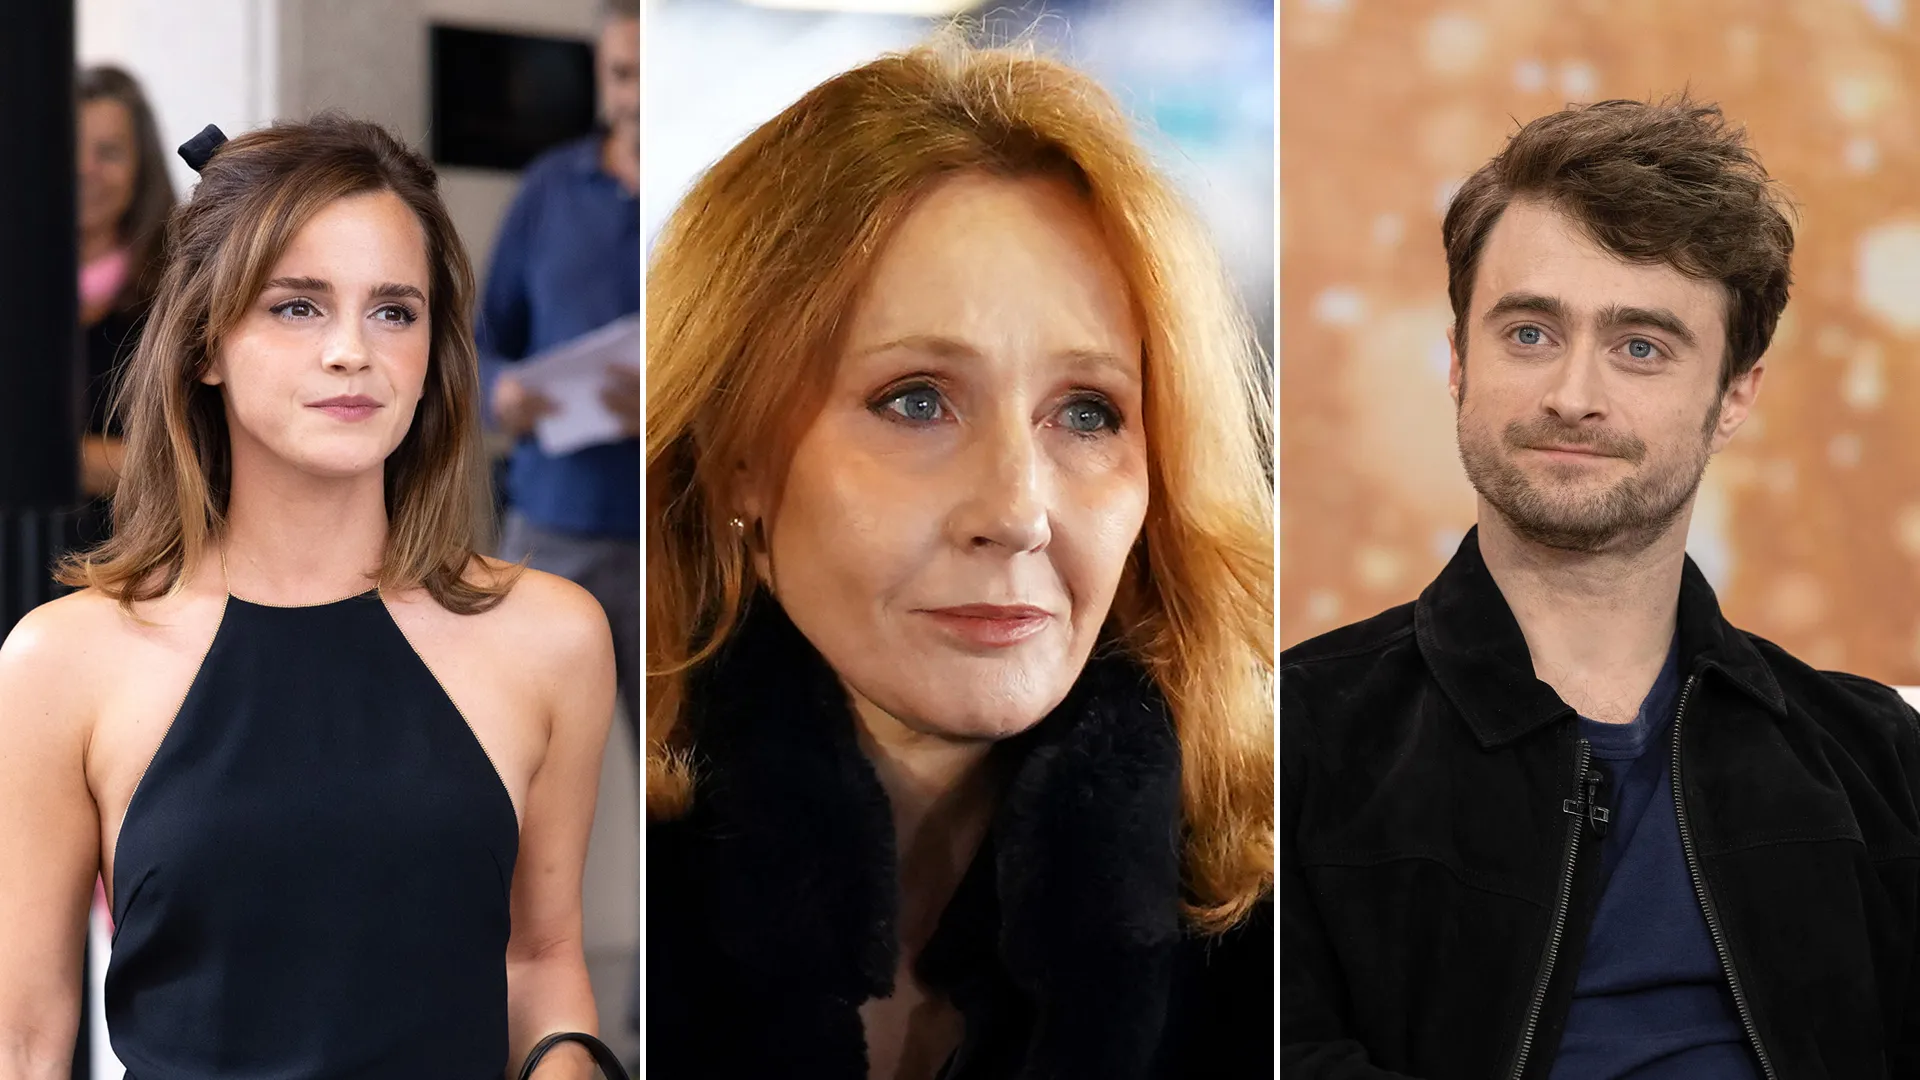 J.K. Rowling and ‘Harry Potter’ Stars Clash Over Transgender Rights: The Fallout Explained